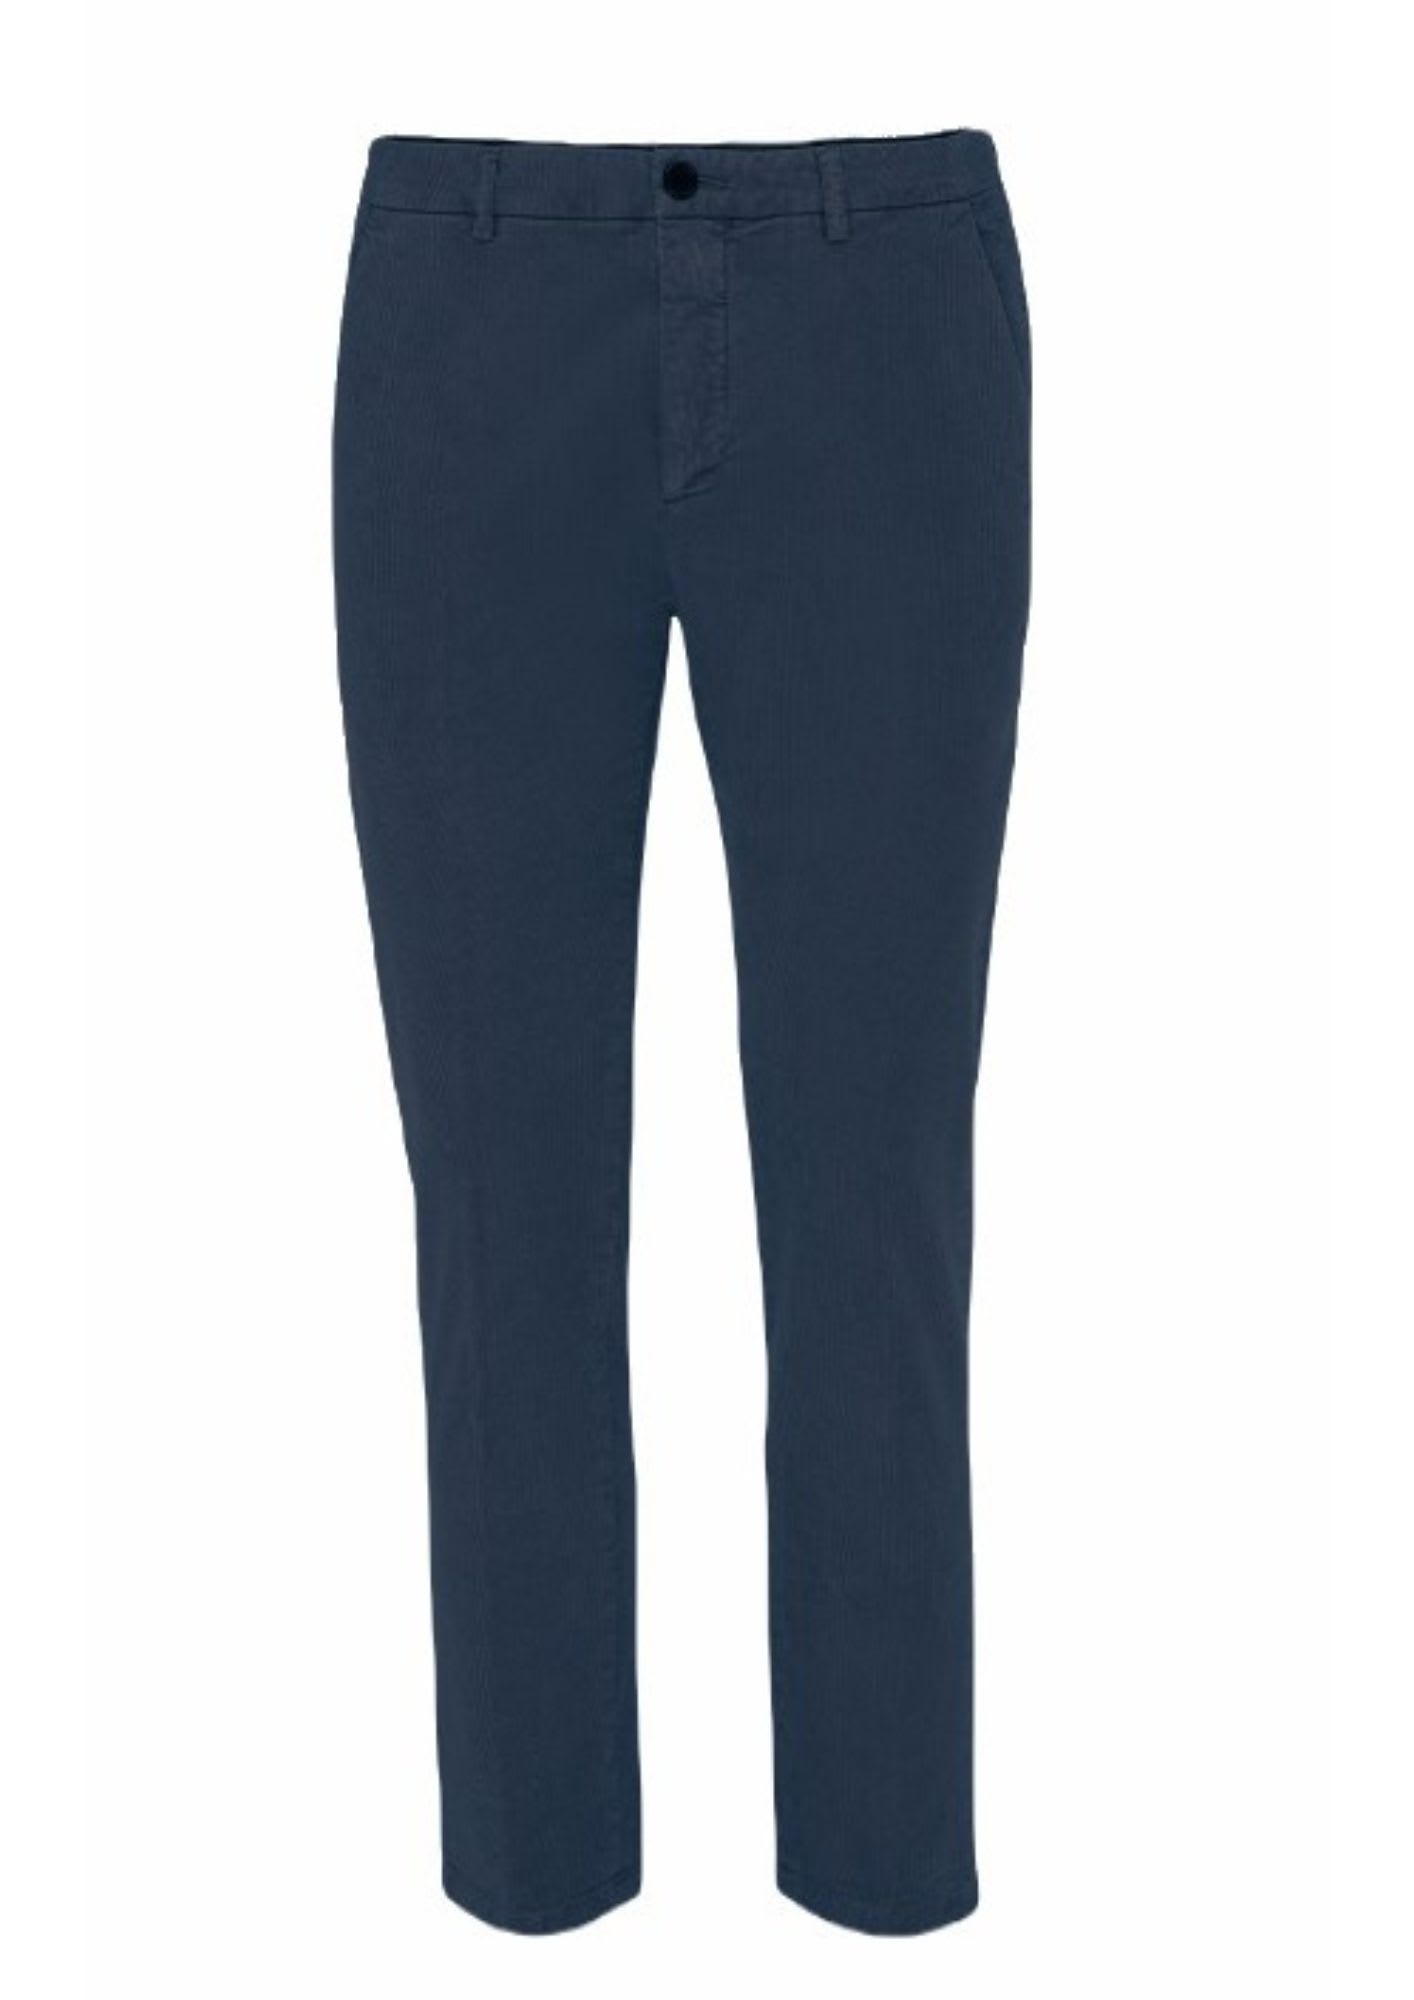 Department Five Prince Pences Chinos In Navy